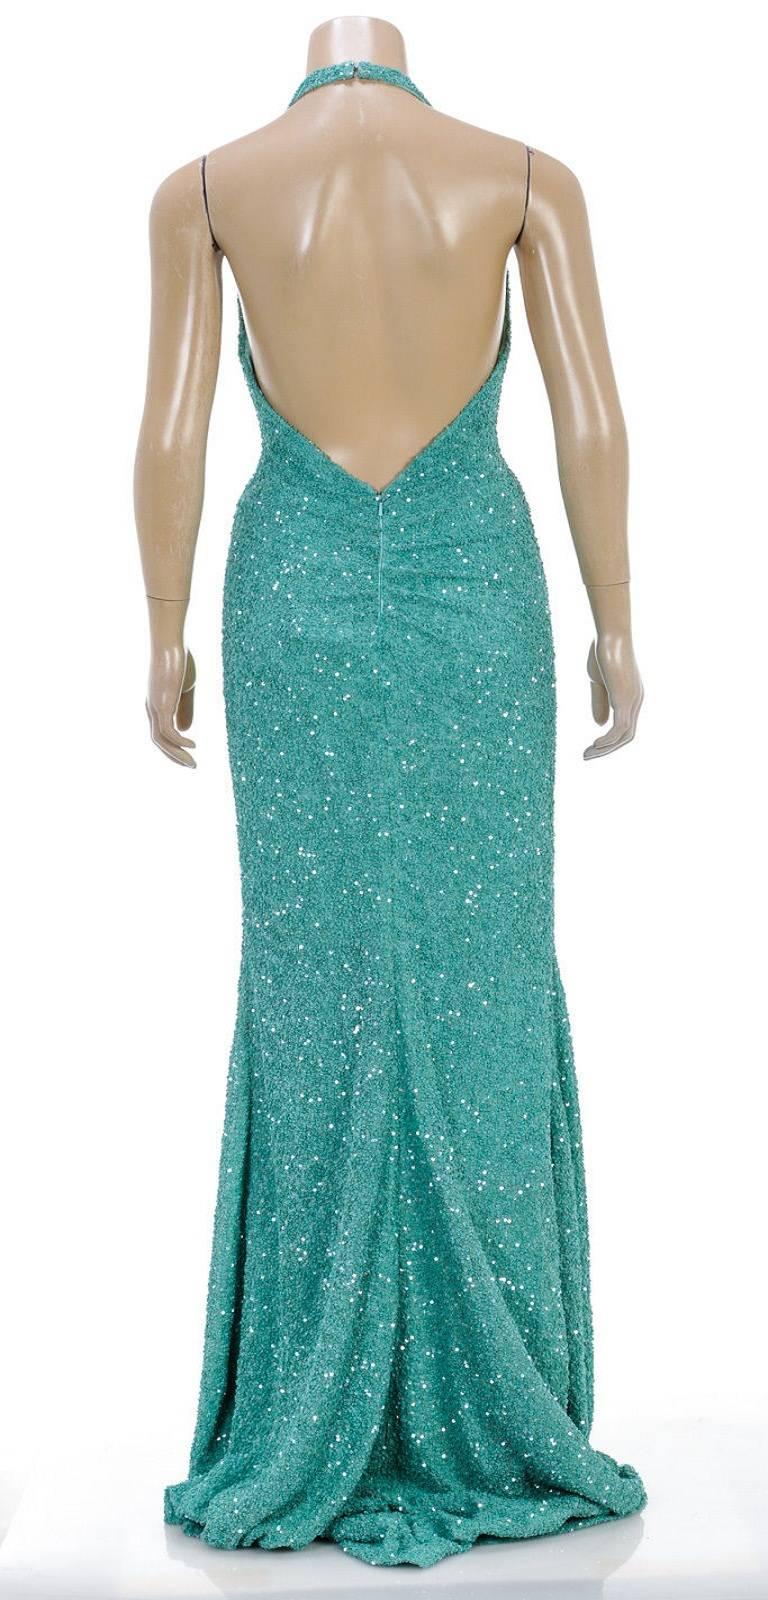 Oday Shakar Aqua Sequined Ruched Halter Floor Length Dress (Size S) In New Condition For Sale In Corona Del Mar, CA